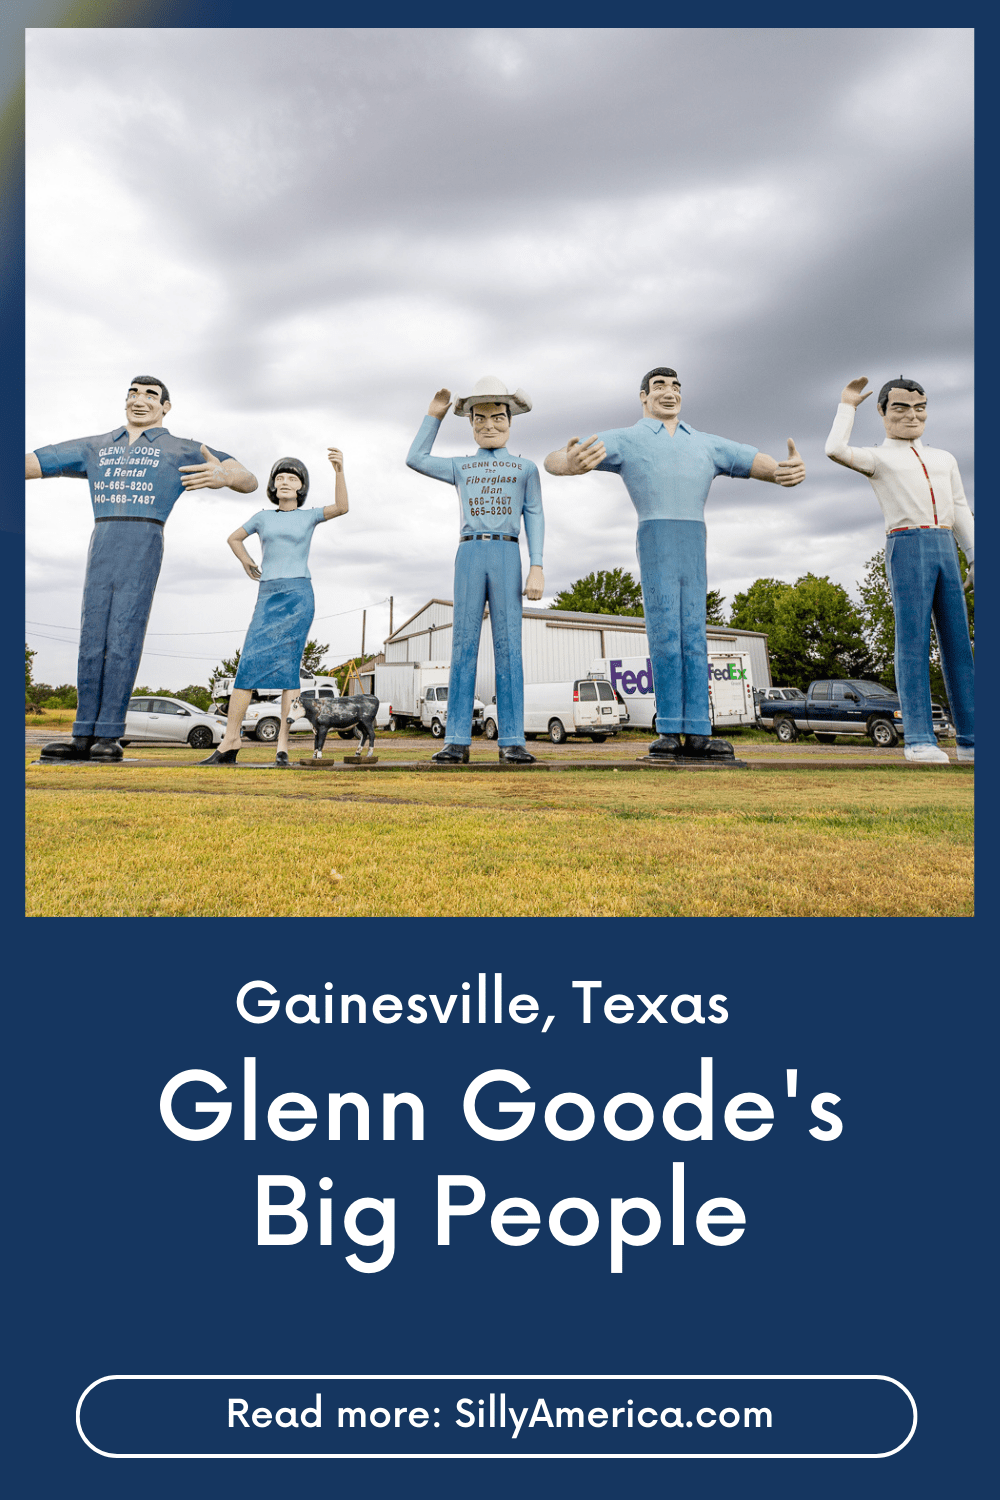 Glenn Goode's Big People in Gainesville, Texas showcases six roadside attractions in one. This gigantic collection is the work of Glen Goode, who assembled the giants in front of his sandblasting business. He acquired, repaired, and recasted giants from around the county including two muffler men, two Big Johns, a Uniroyal Gal, and a little fiberglass cow. Stop by on your Texas road trip. #Texas #TexasRoadTrip #RoadTripStop #RoadsideAttraction #RoadsideAttractions #TexasRoadsideAttraction